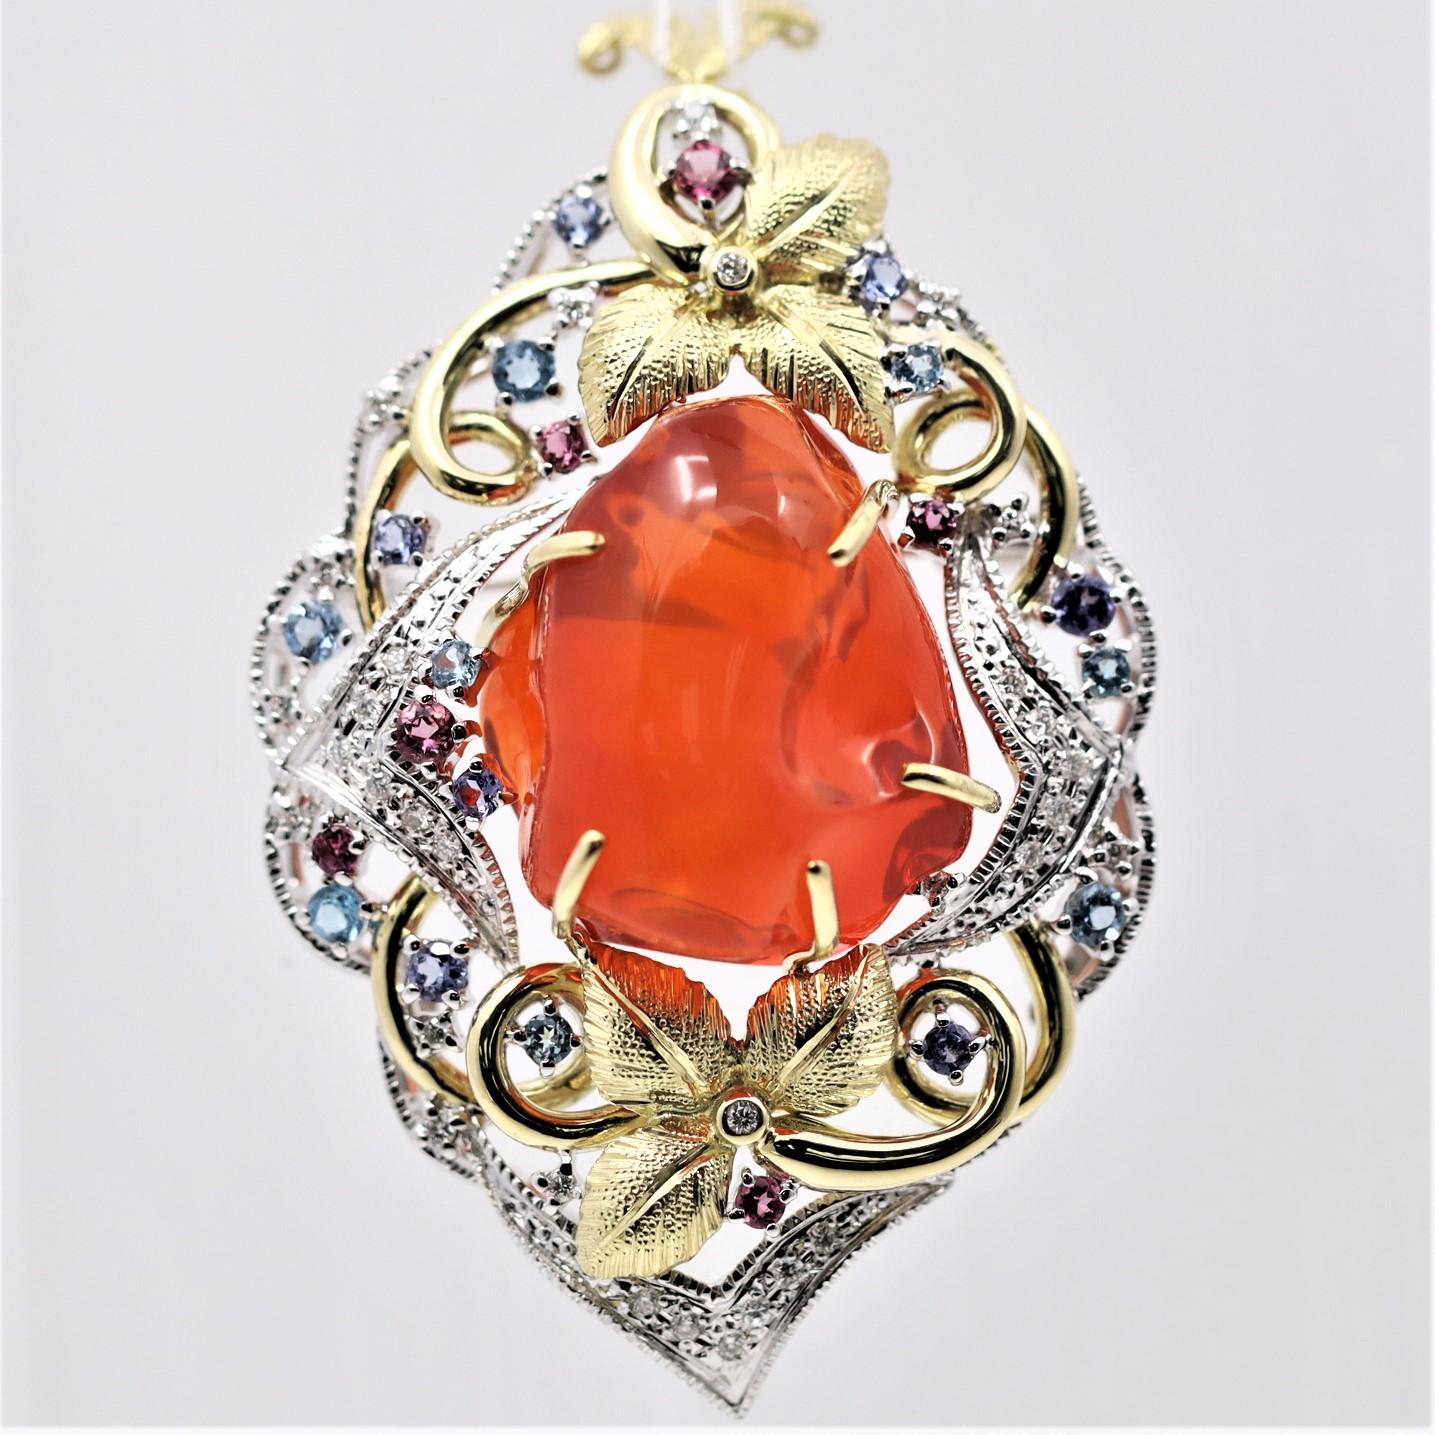 A unique, lively piece featuring a 36.89 carat fire opal with excellent quality! It has flashes of greens, oranges, and yellows dancing across its surface as the light hits it. IT is accented by 0.32 carats of round brilliant-cut diamonds, which add